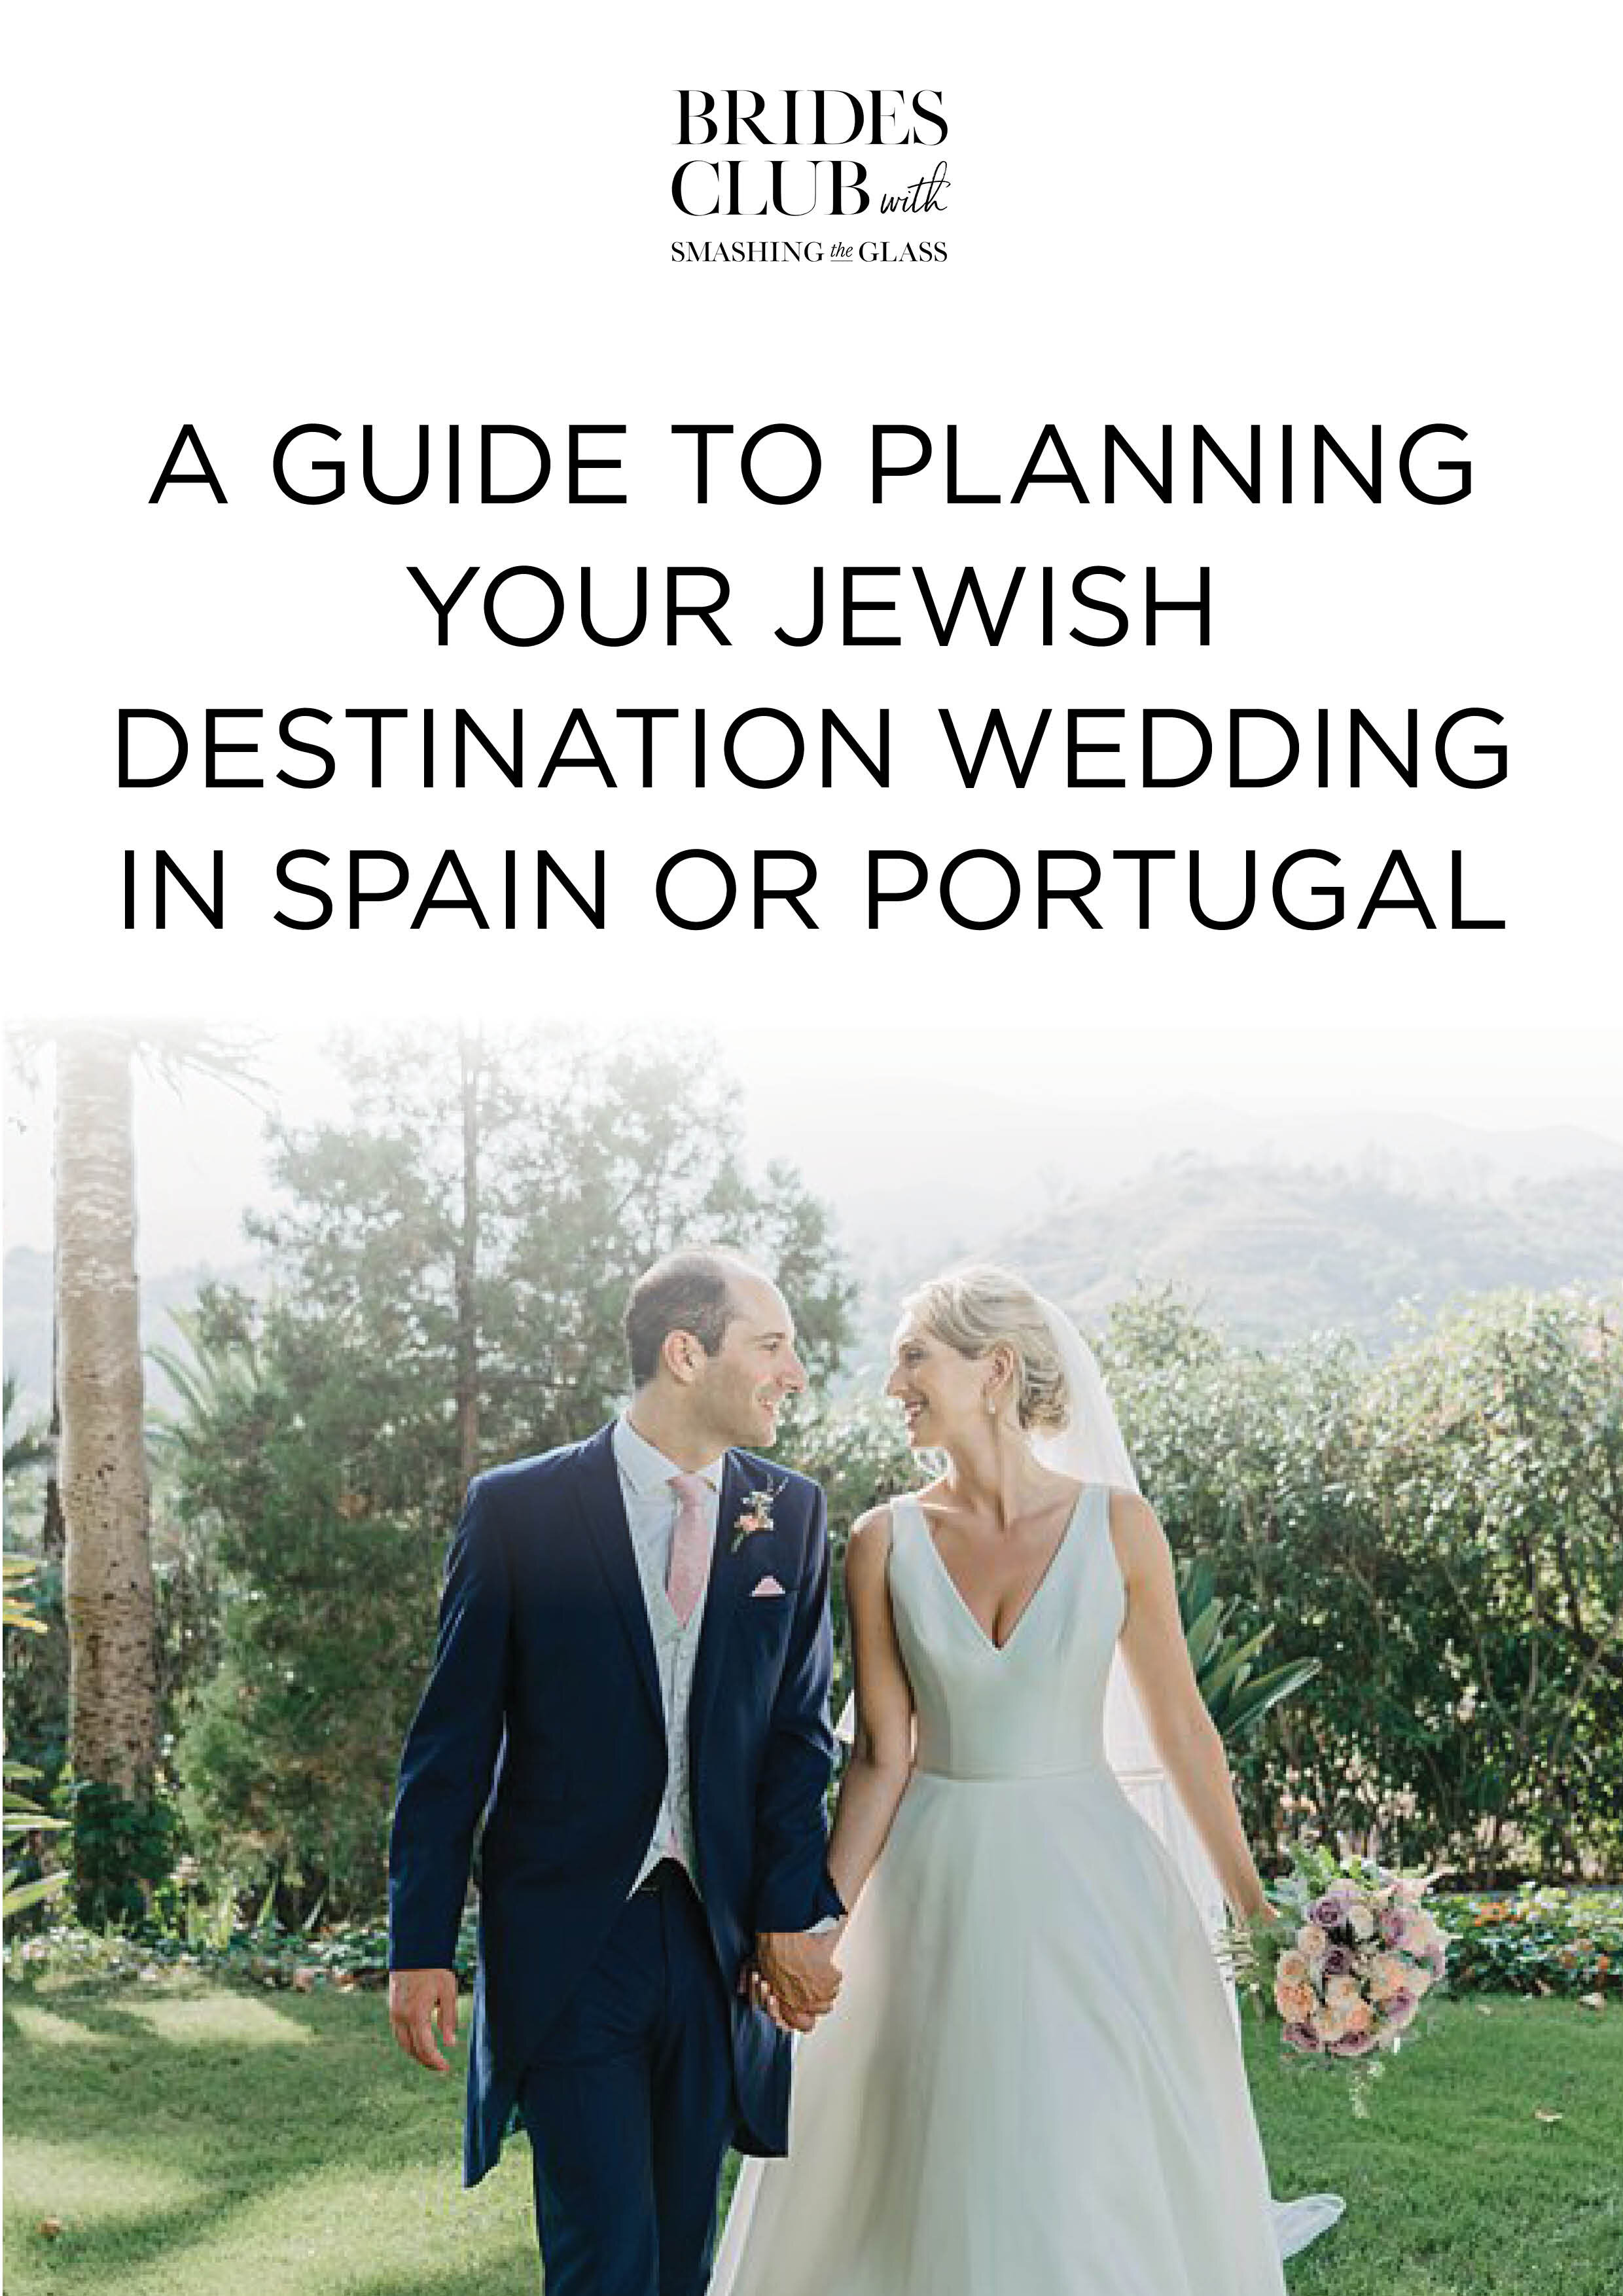 A Guide to Planning Your Jewish Destination Wedding in Spain or Portugal